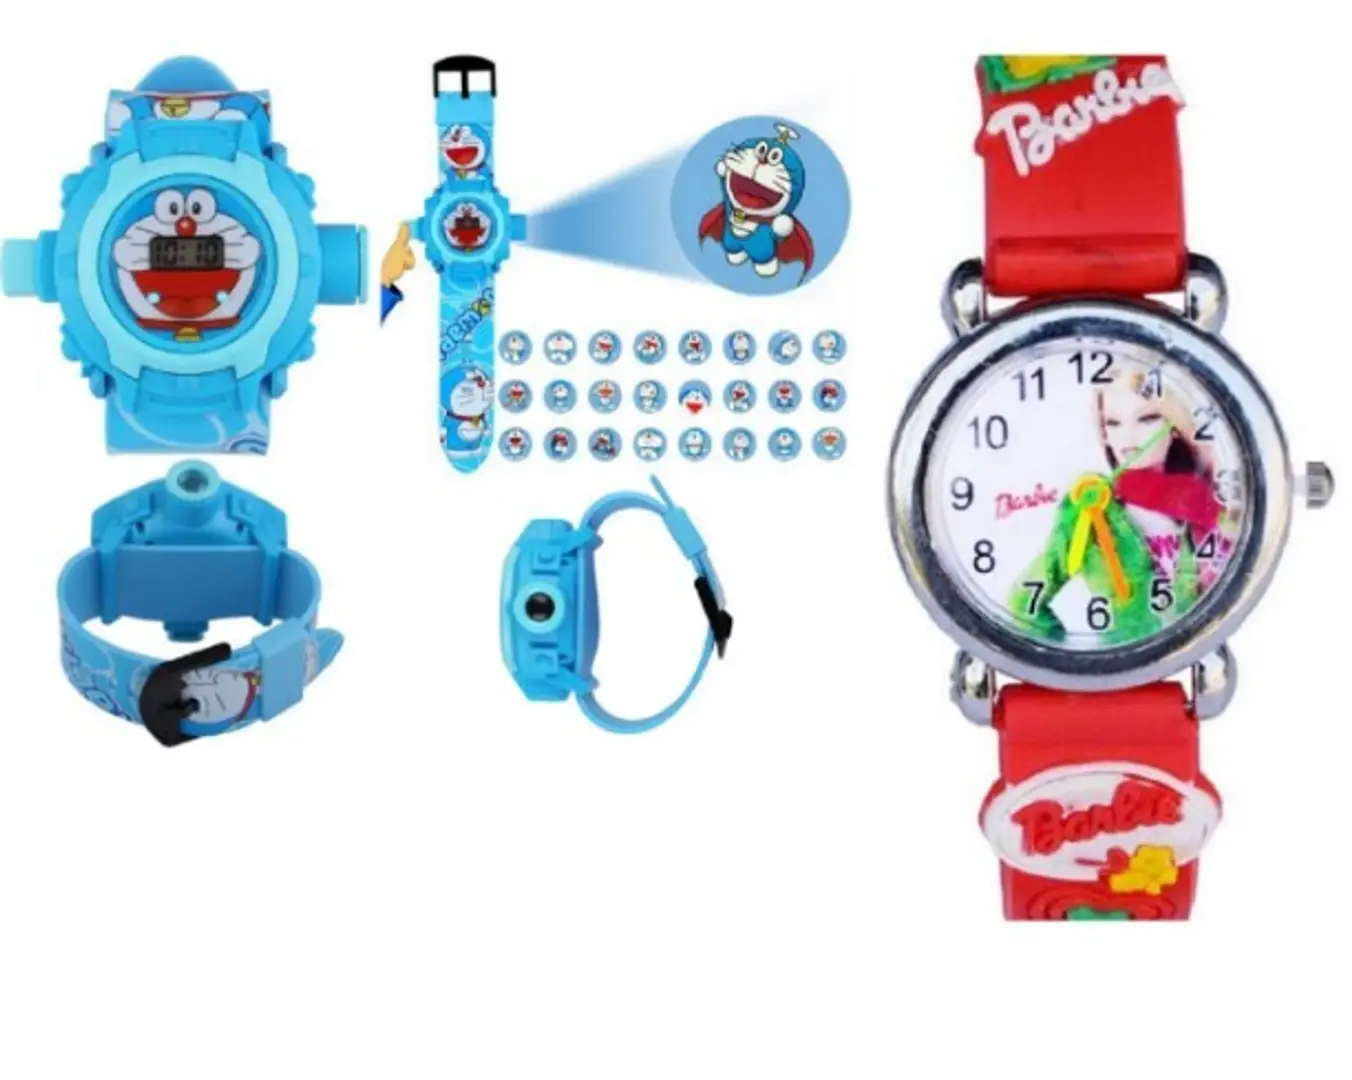 Doraemon watches with figure dolls - Japan Today